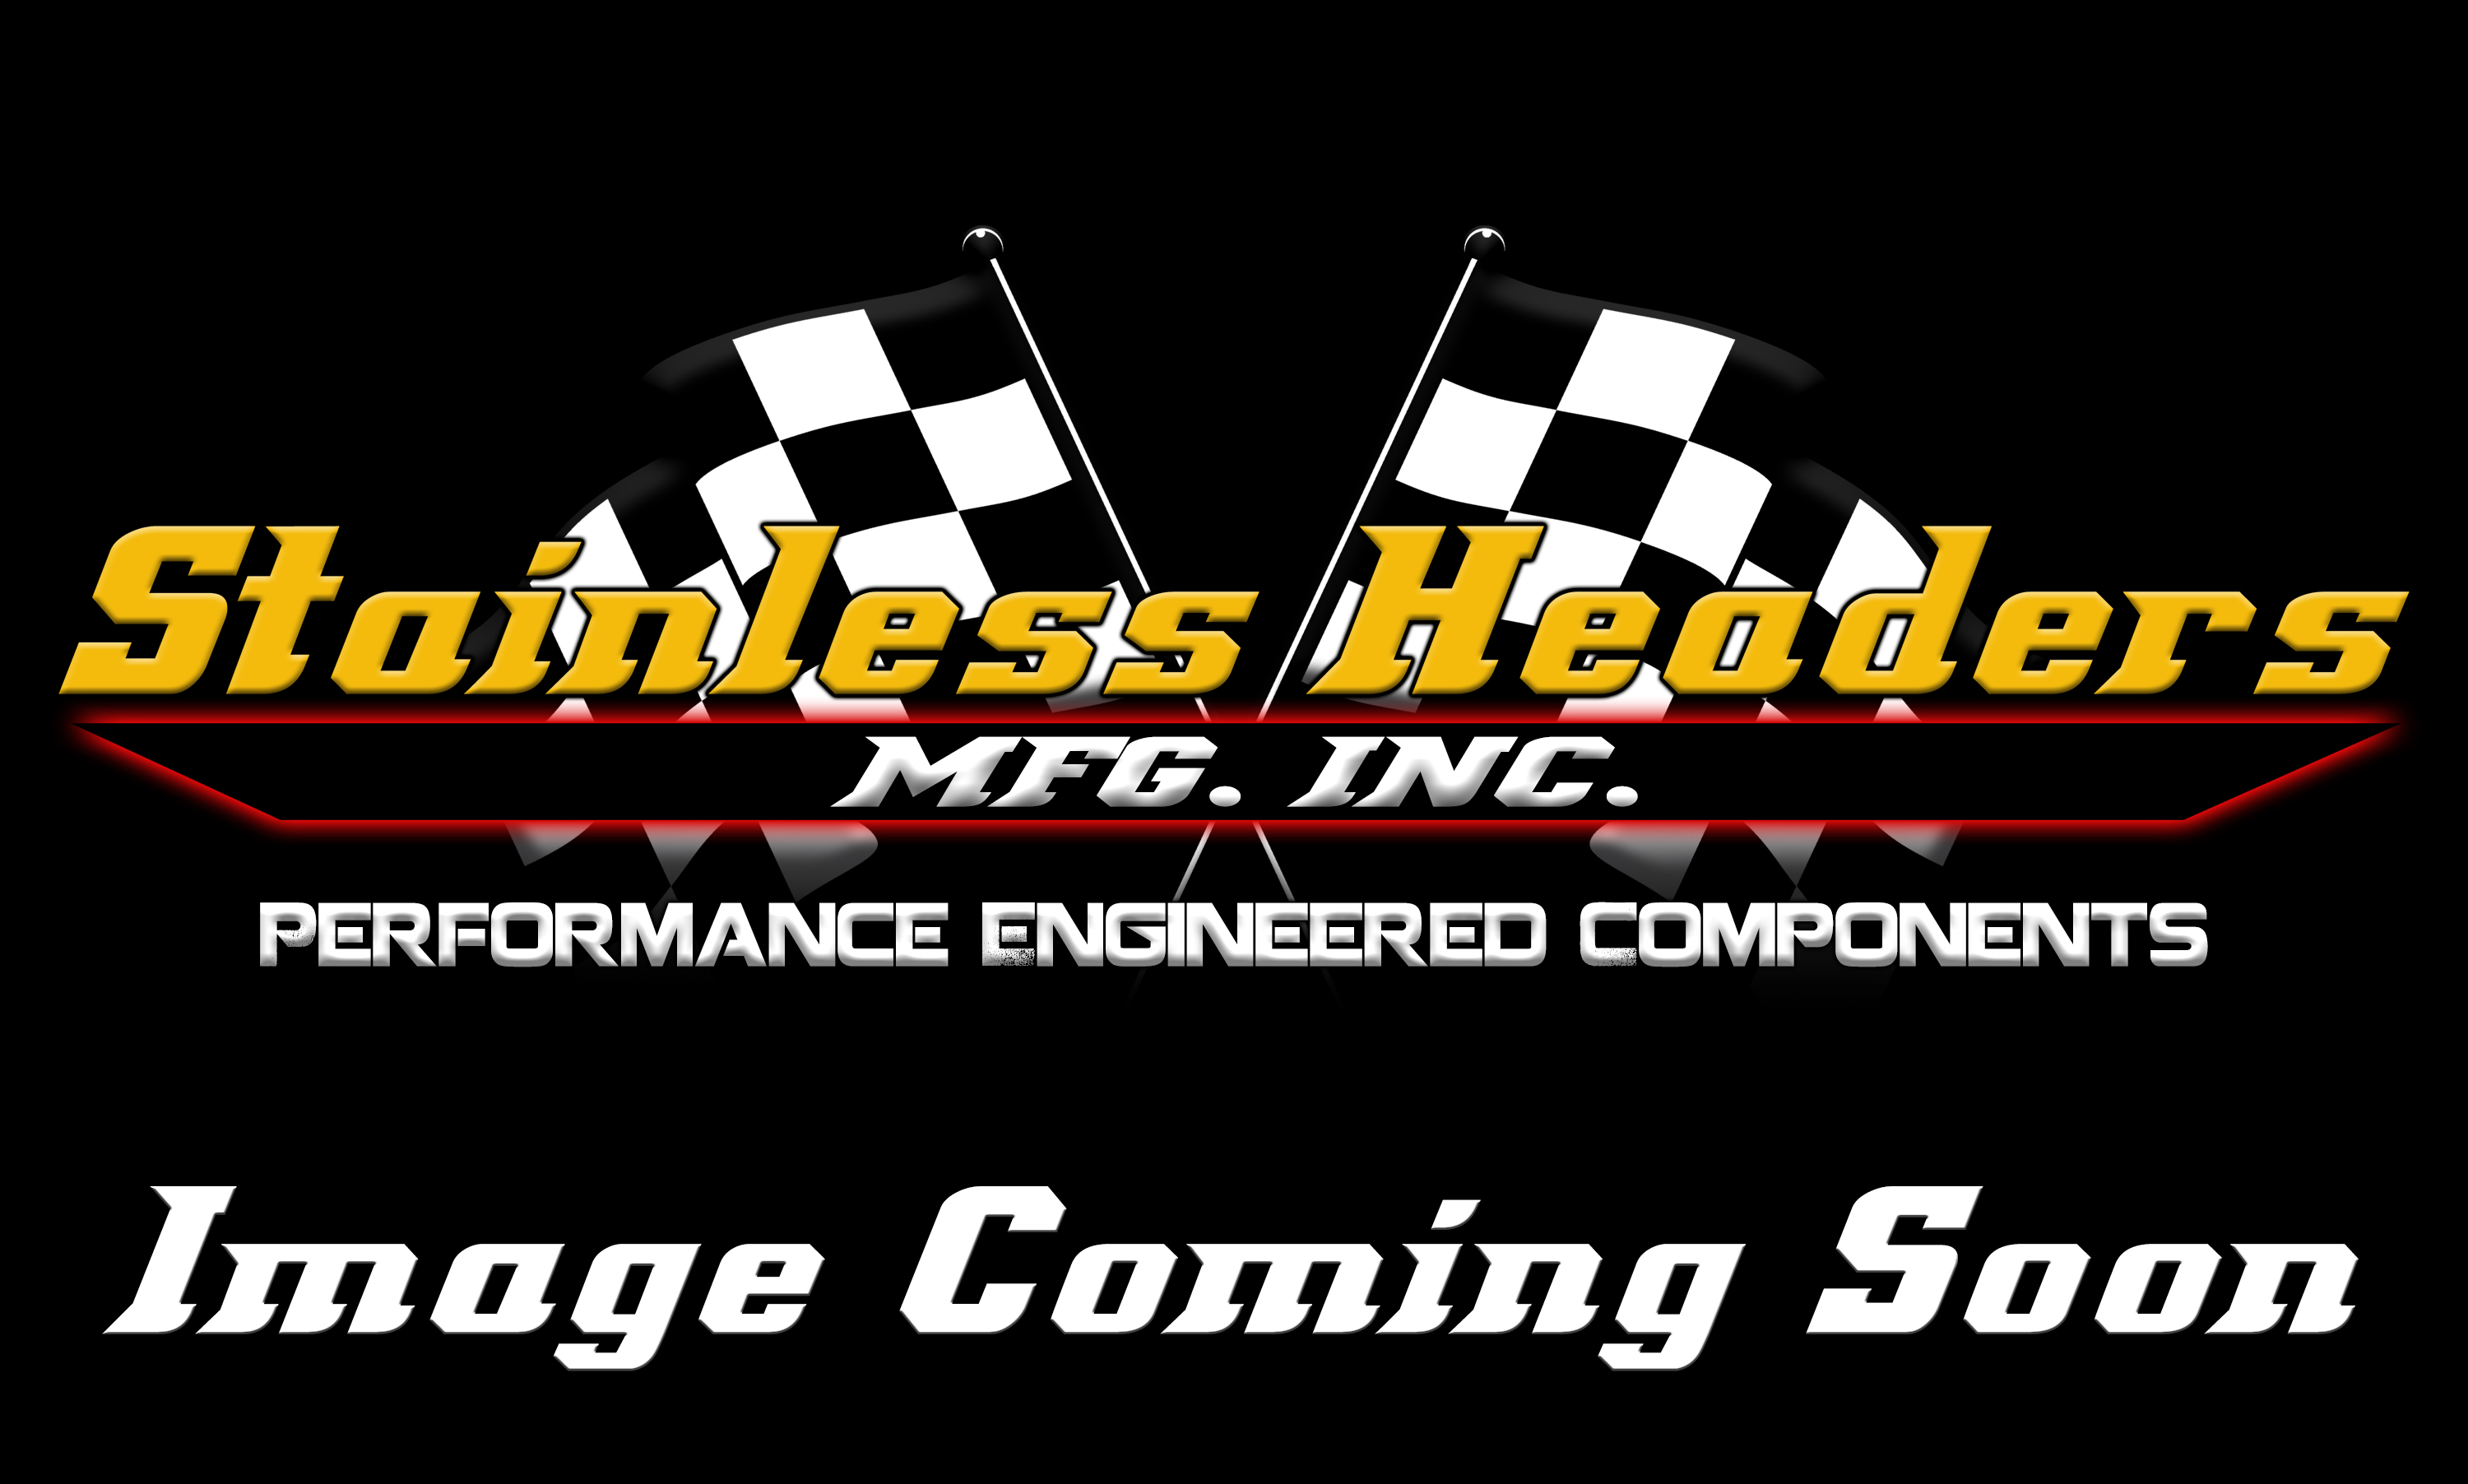 Stainless Headers - Splayed Valve Small Block Chevy Turbo Manifold Build Kit - Image 3